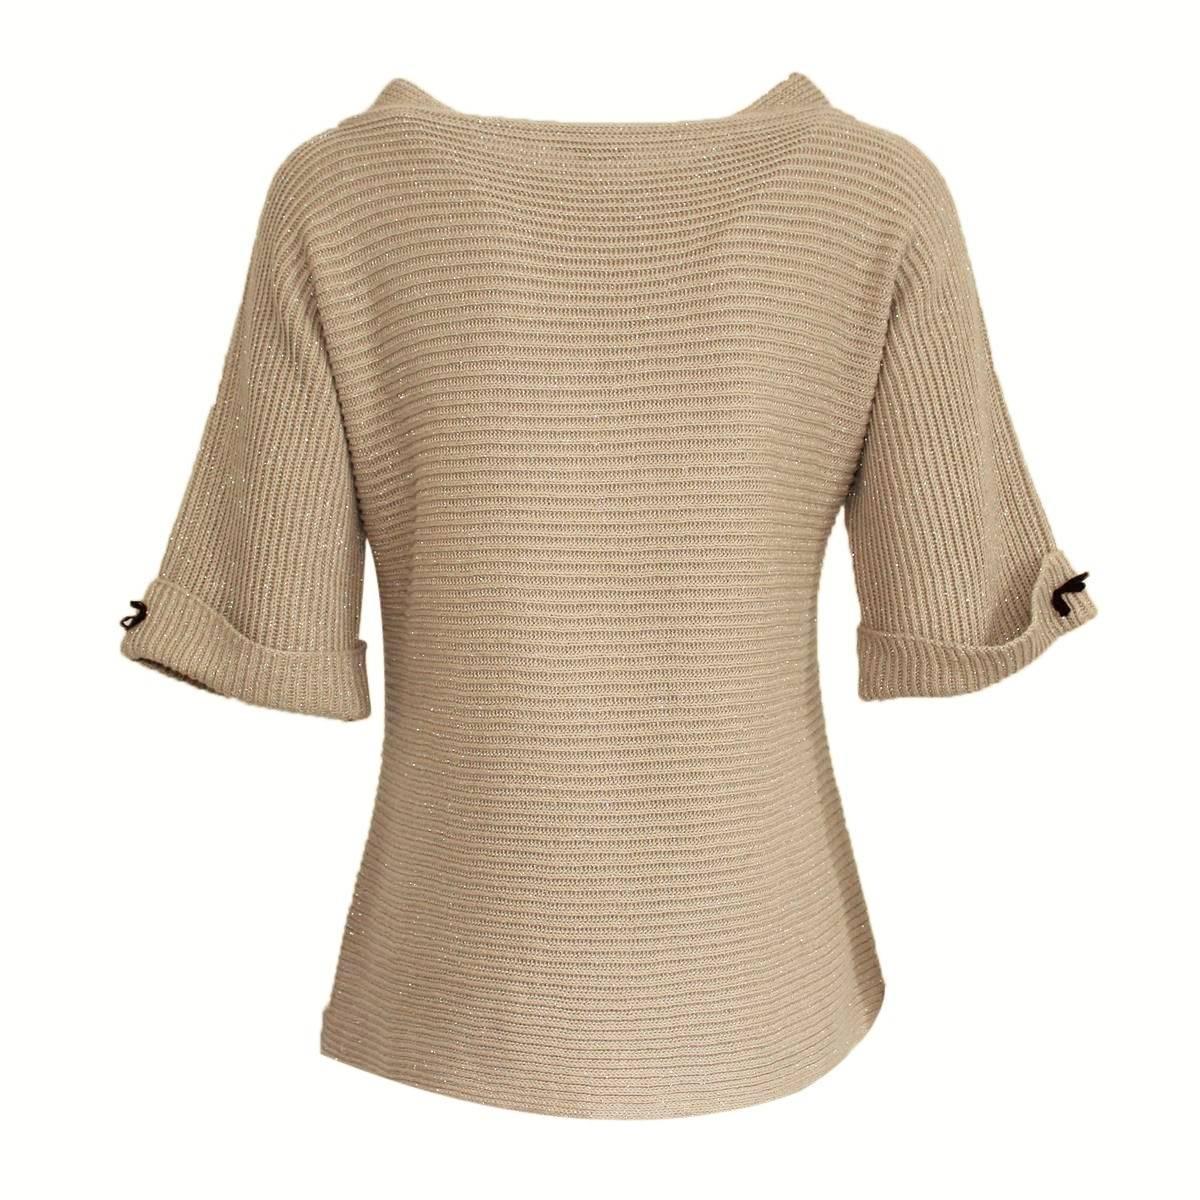 Beautiful and top quality Brunello Cucinelli sweater
Cotton and lamé
Natural color
Short sleeve
Crew-neck
Size M
Made in Italy
Worldwide express shipping included in the price 